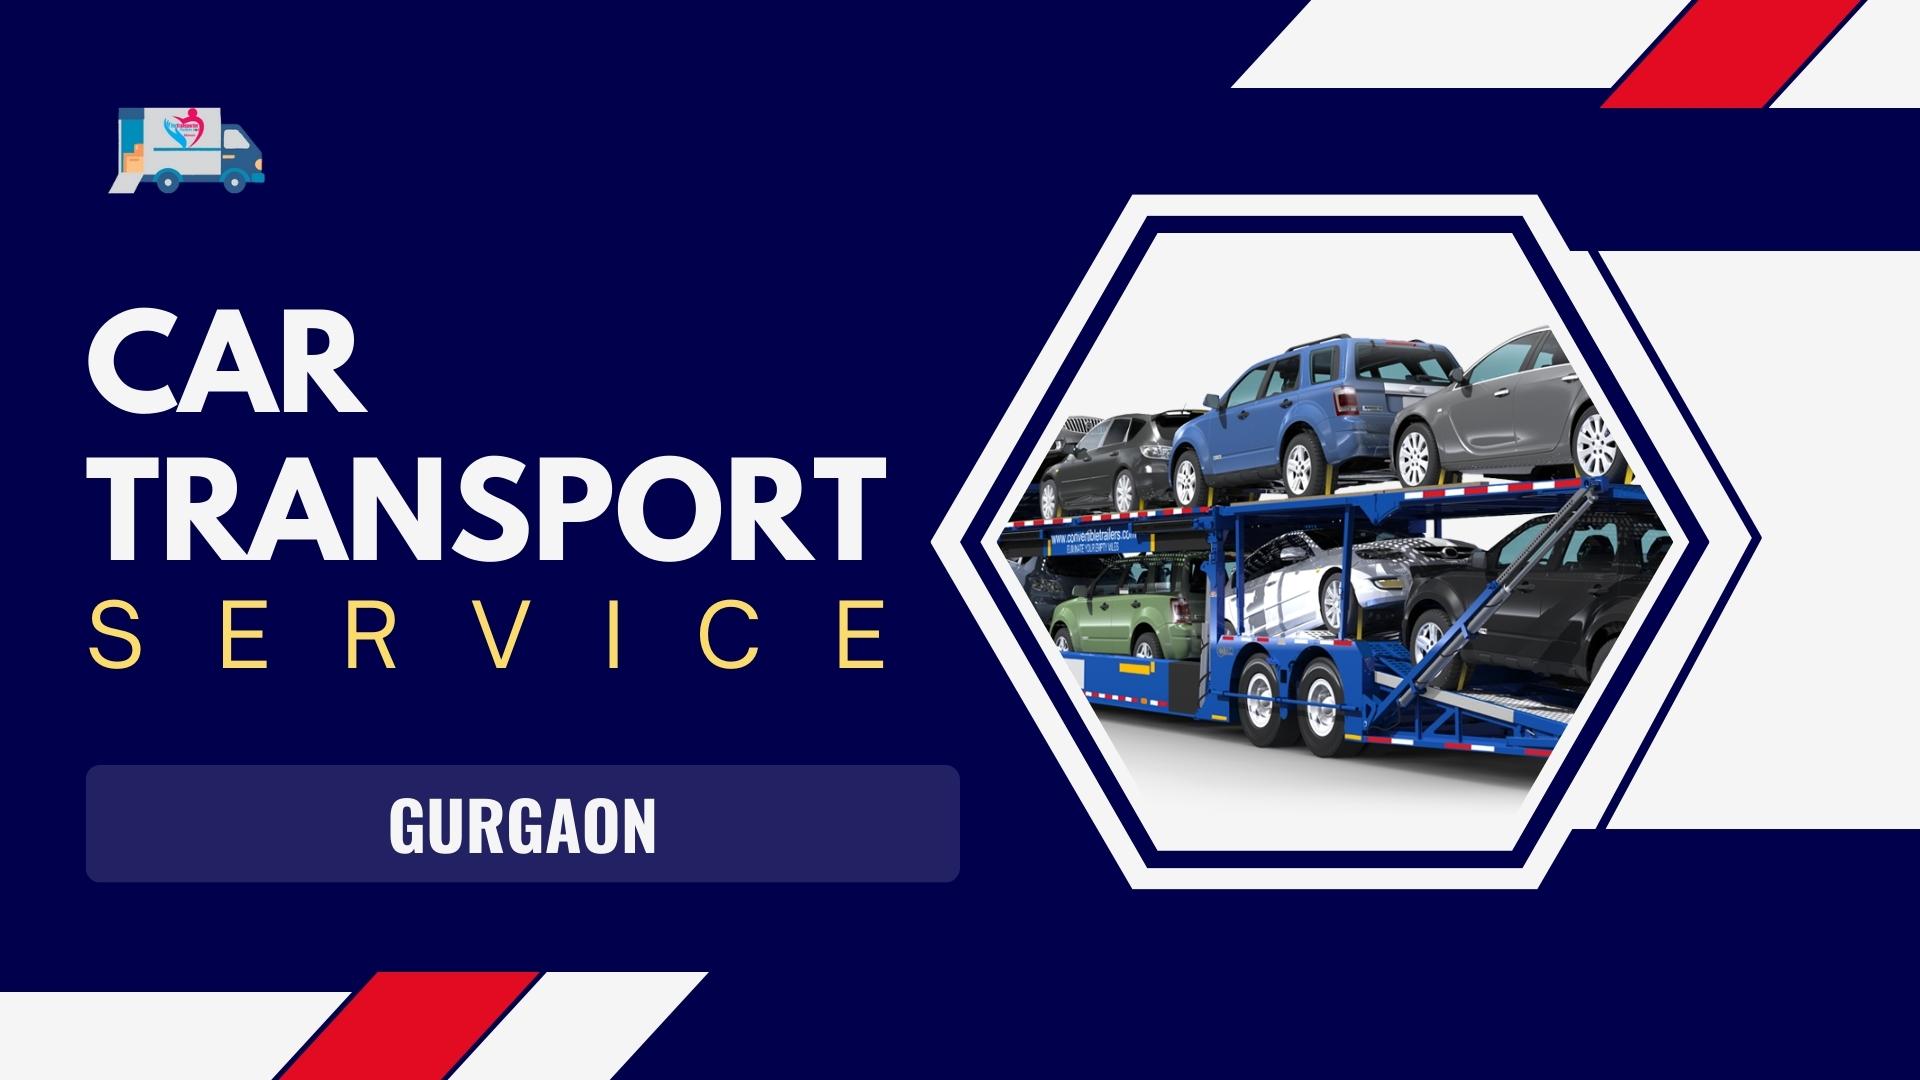 Quality car Carrier Service in Gurgaon